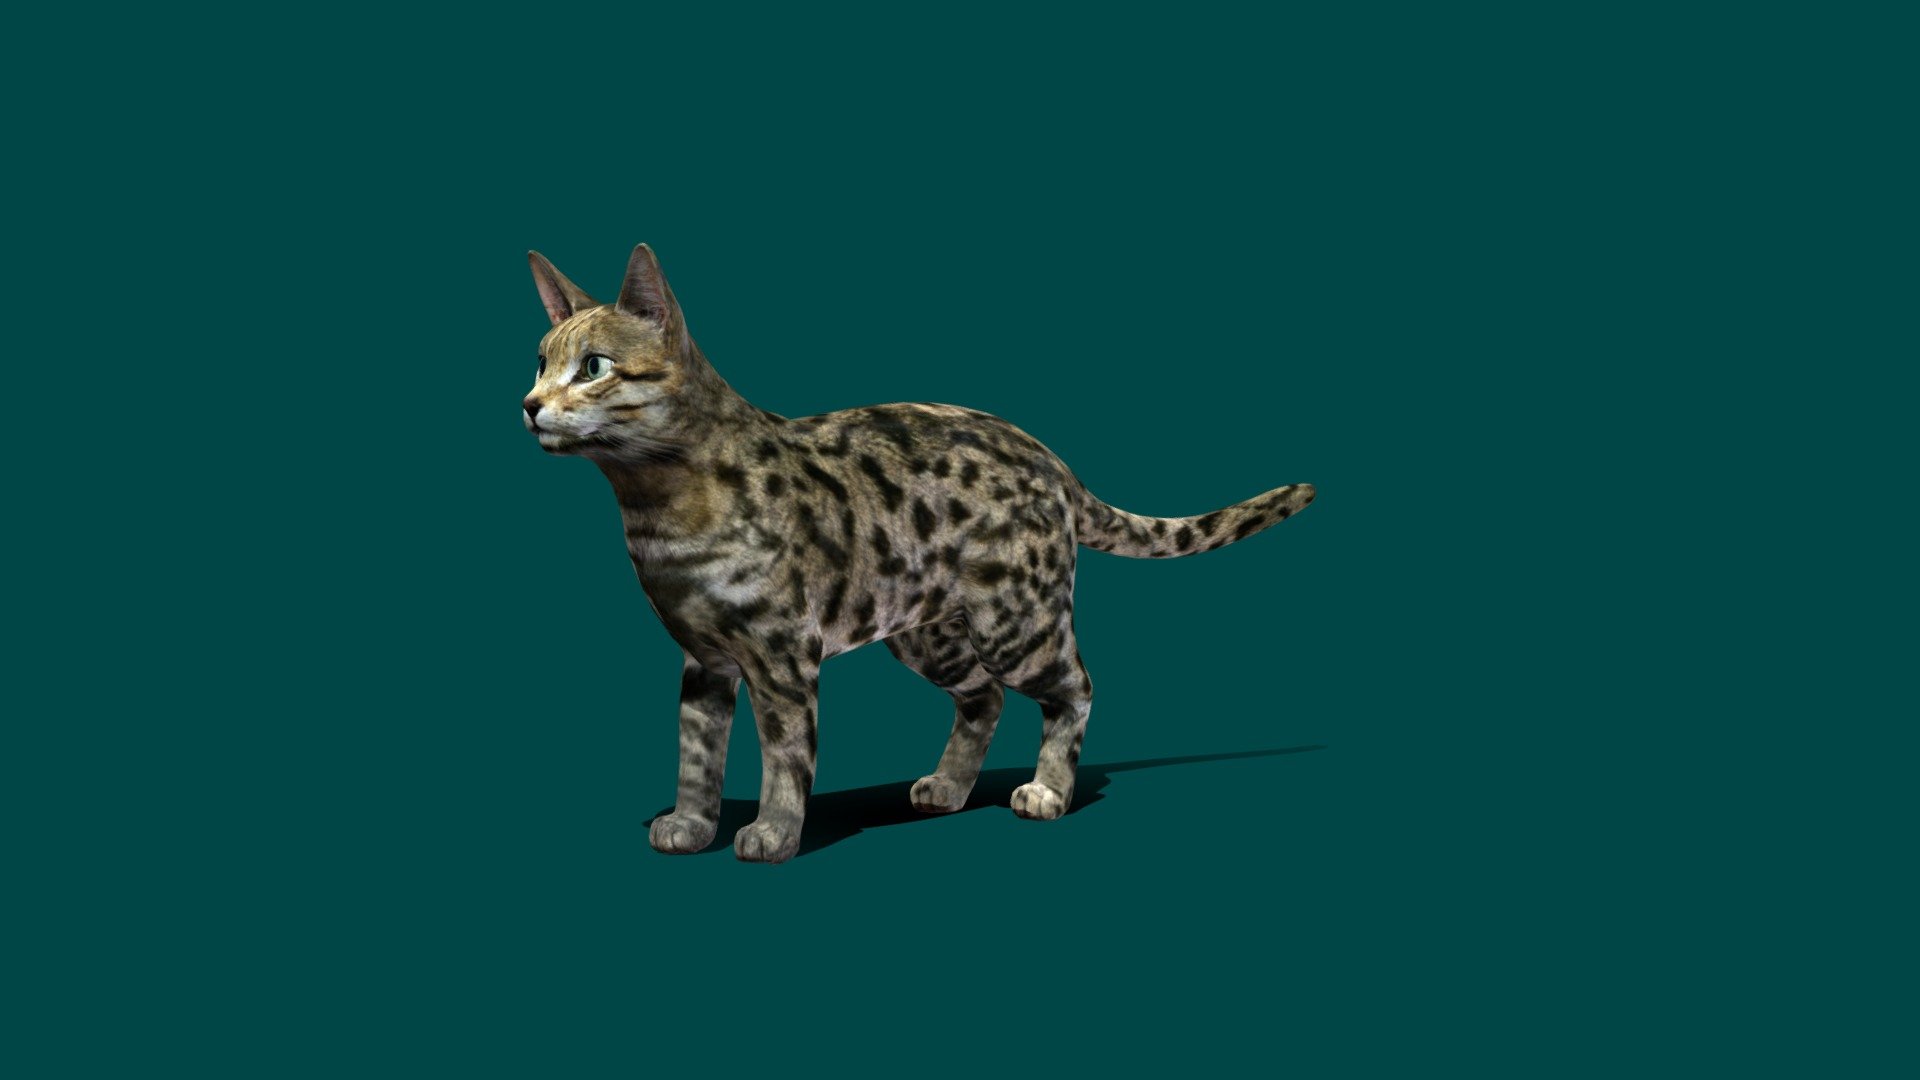 The black-footed_cat, also called the small-spotted_cat, is the smallest_wild_cat in Africa, having a head-and-body length of 35–52 cm. Despite its name, only the soles of its feet are black or dark brown. With its bold small spots and stripes on the tawny fur, it is well camouflaged, especially on moonlit nights. Wikipedia
Trophic level: Carnivorous Encyclopedia of Life
Conservation status: Vulnerable (Population decreasing) Encyclopedia of Life
Scientific name: Felis_nigripes
Lifespan: 10 years (In captivity)
Mass: 1.9 kg (Male, Adult), 1.3 kg (Female, Adult)
Family: Felidae
Kingdom: Animalia - Black footed Cat - 3D model by Nyilonelycompany 3d model